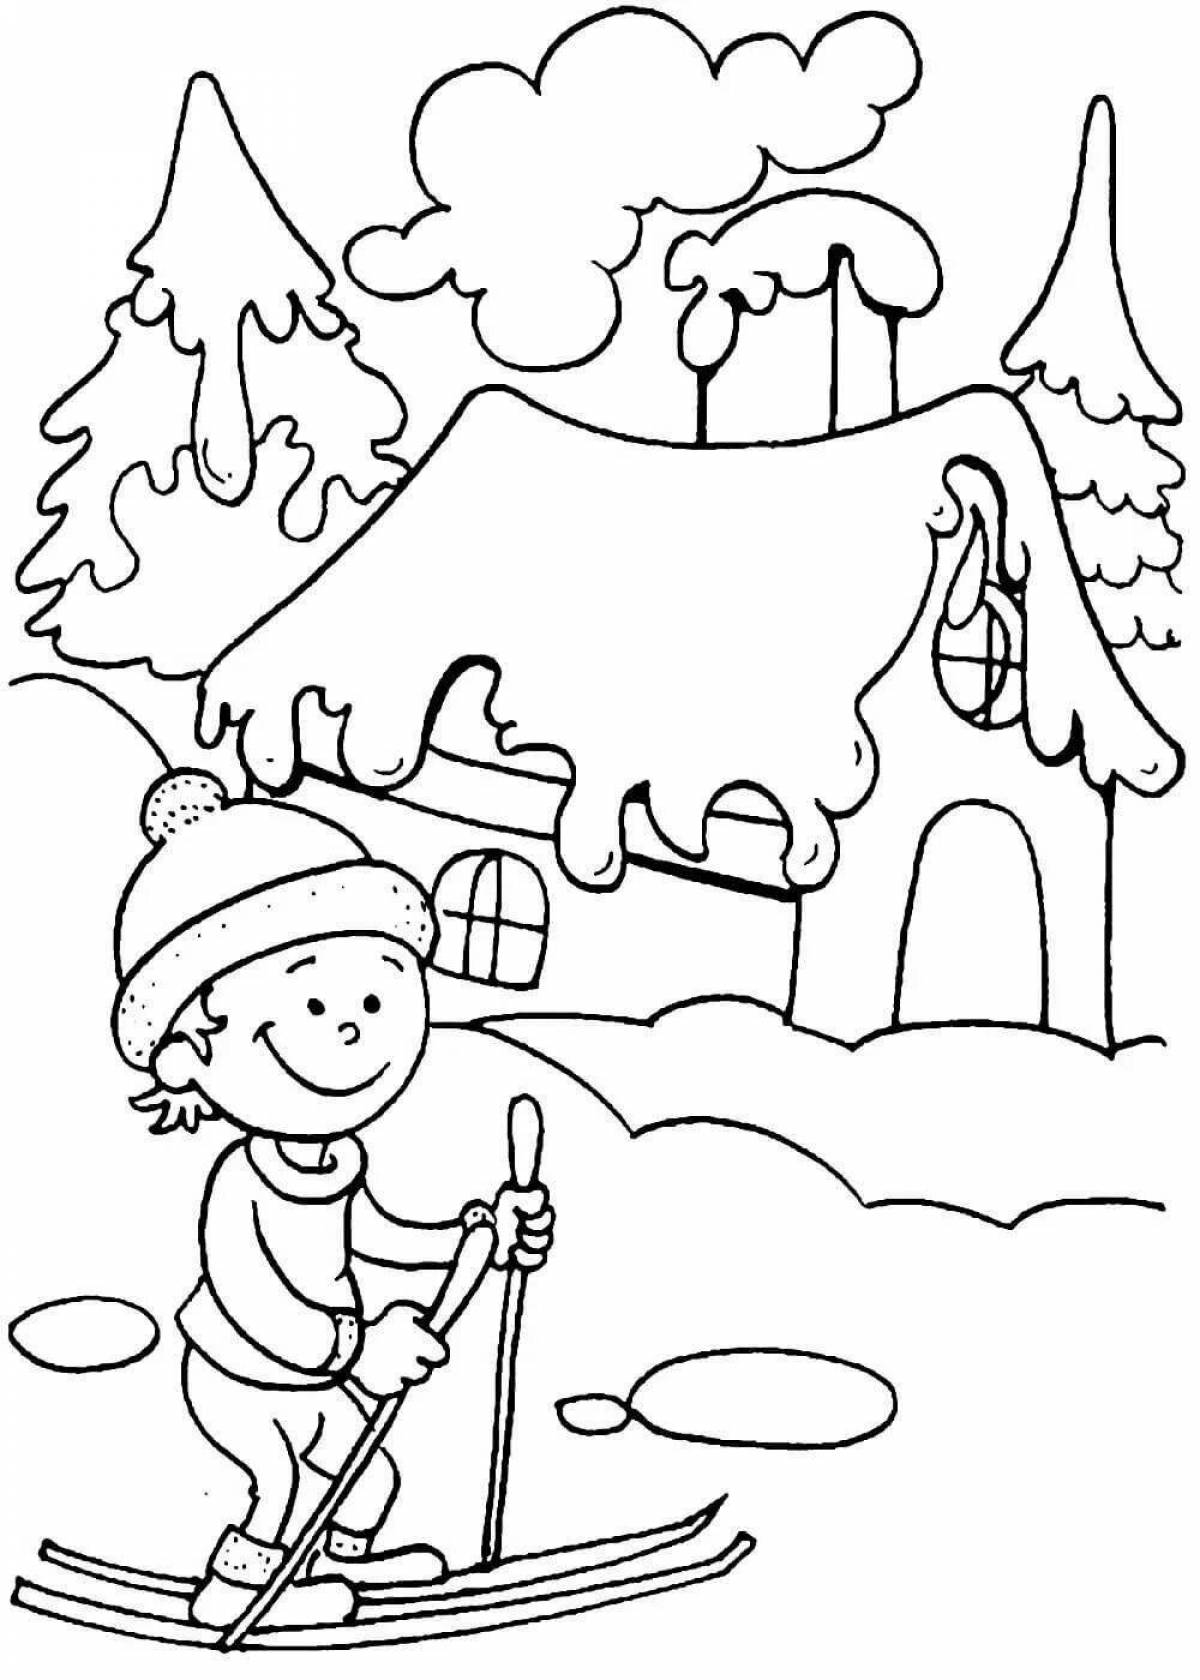 Joyful winter coloring book for children 6-7 years old